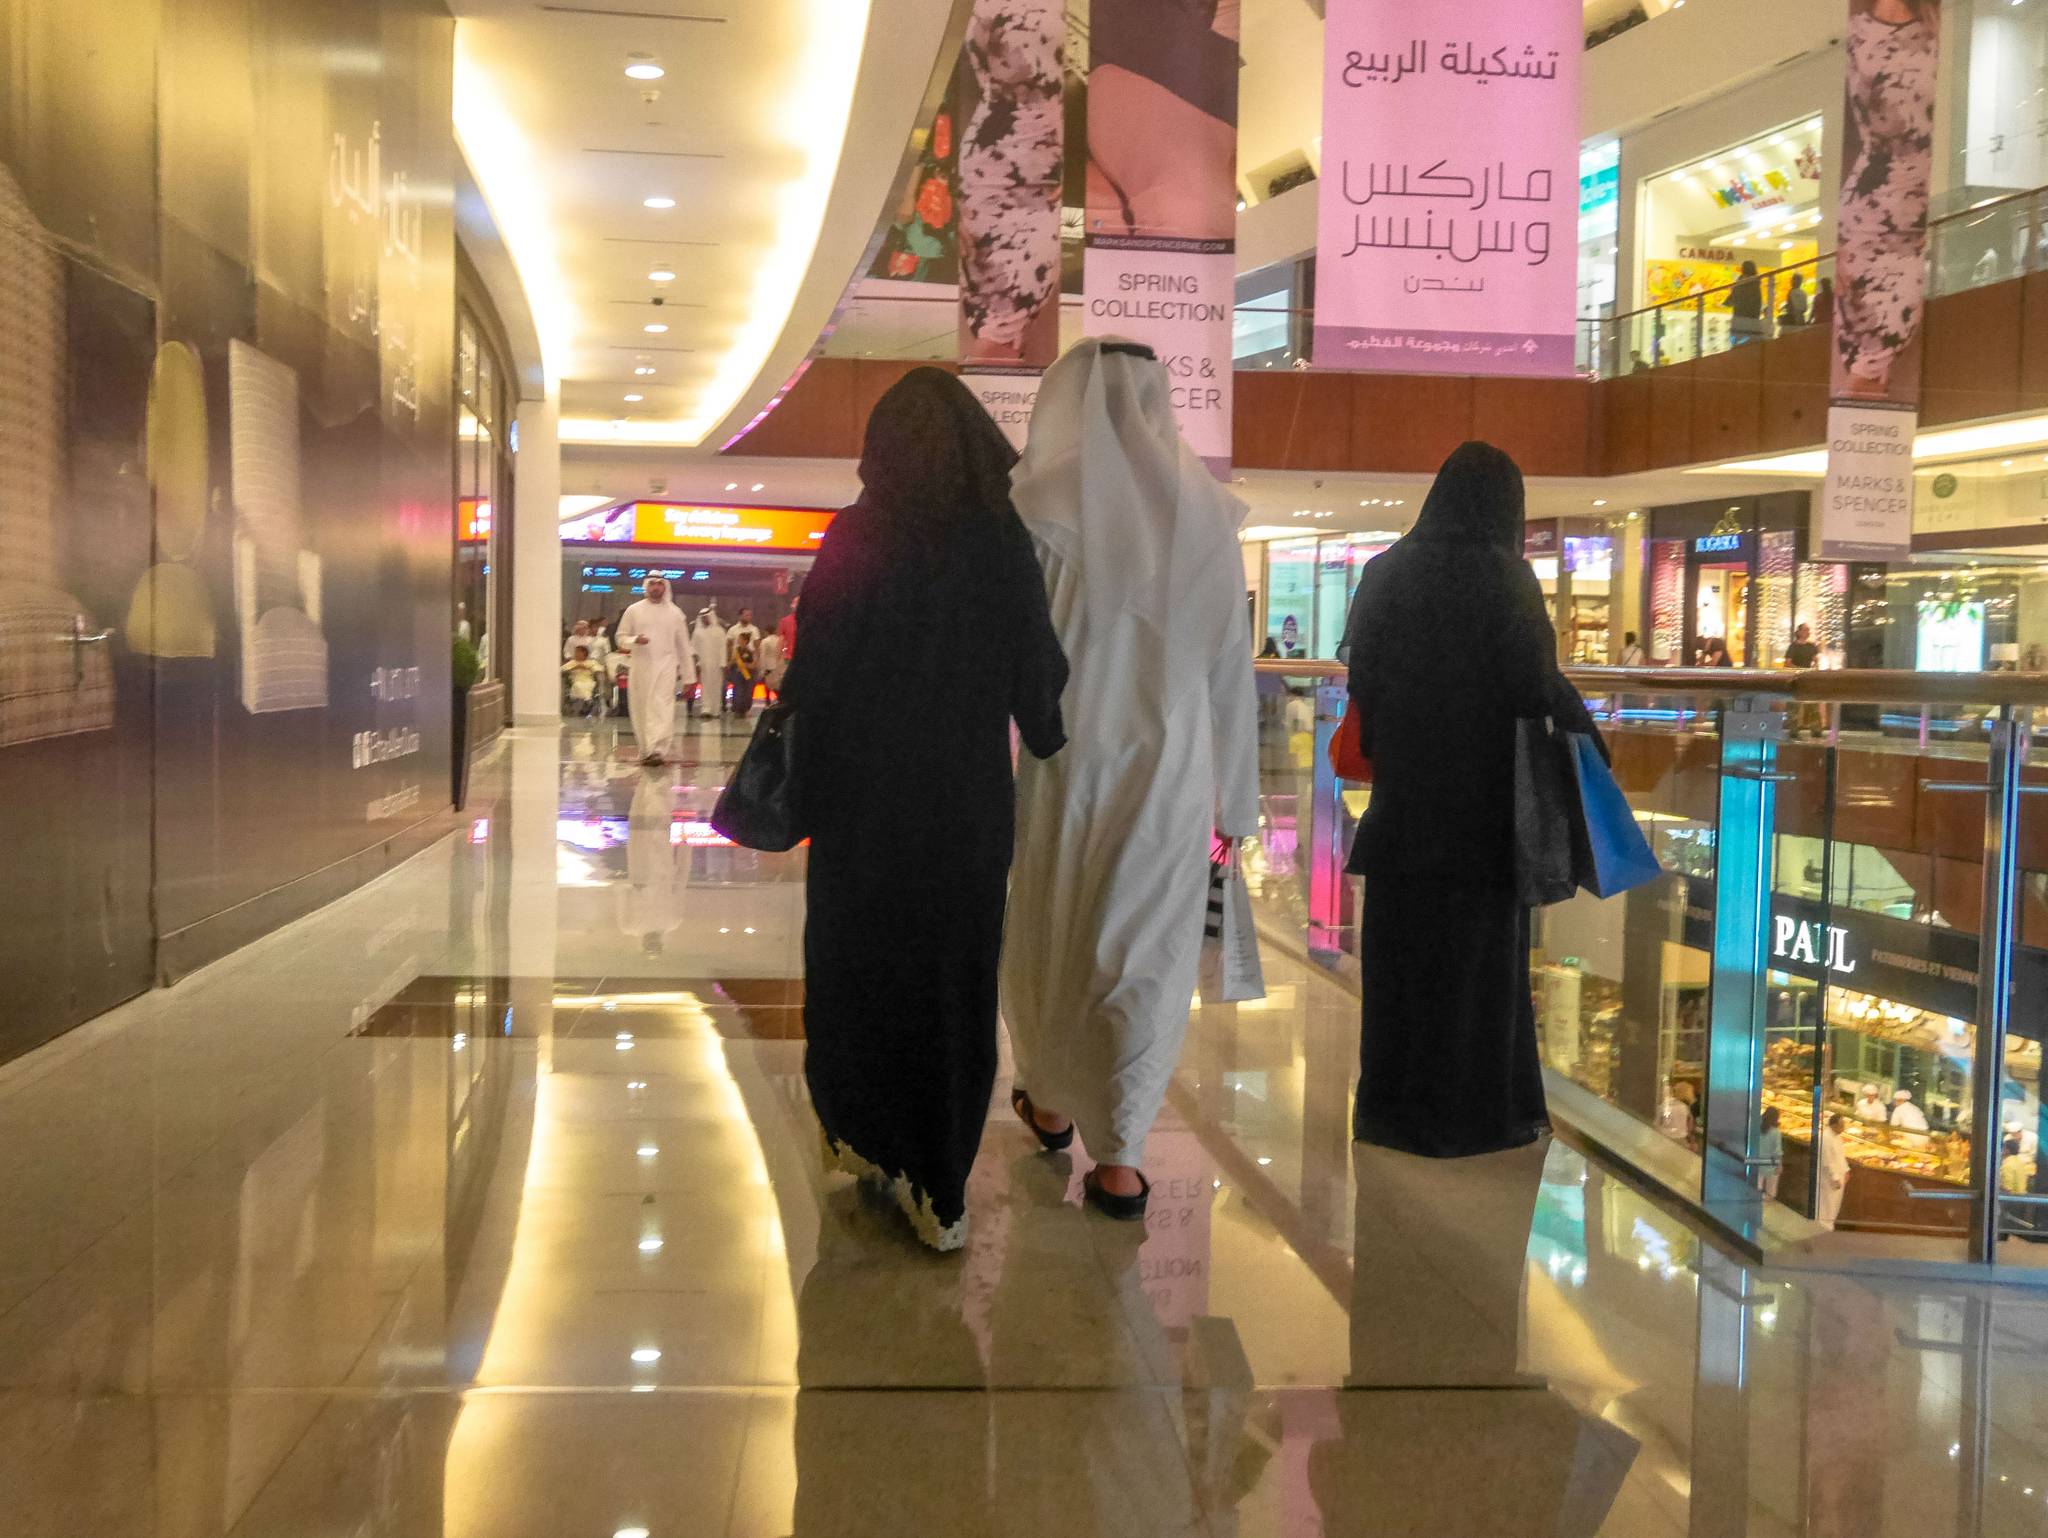 Shopping is an expensive hobby in the UAE